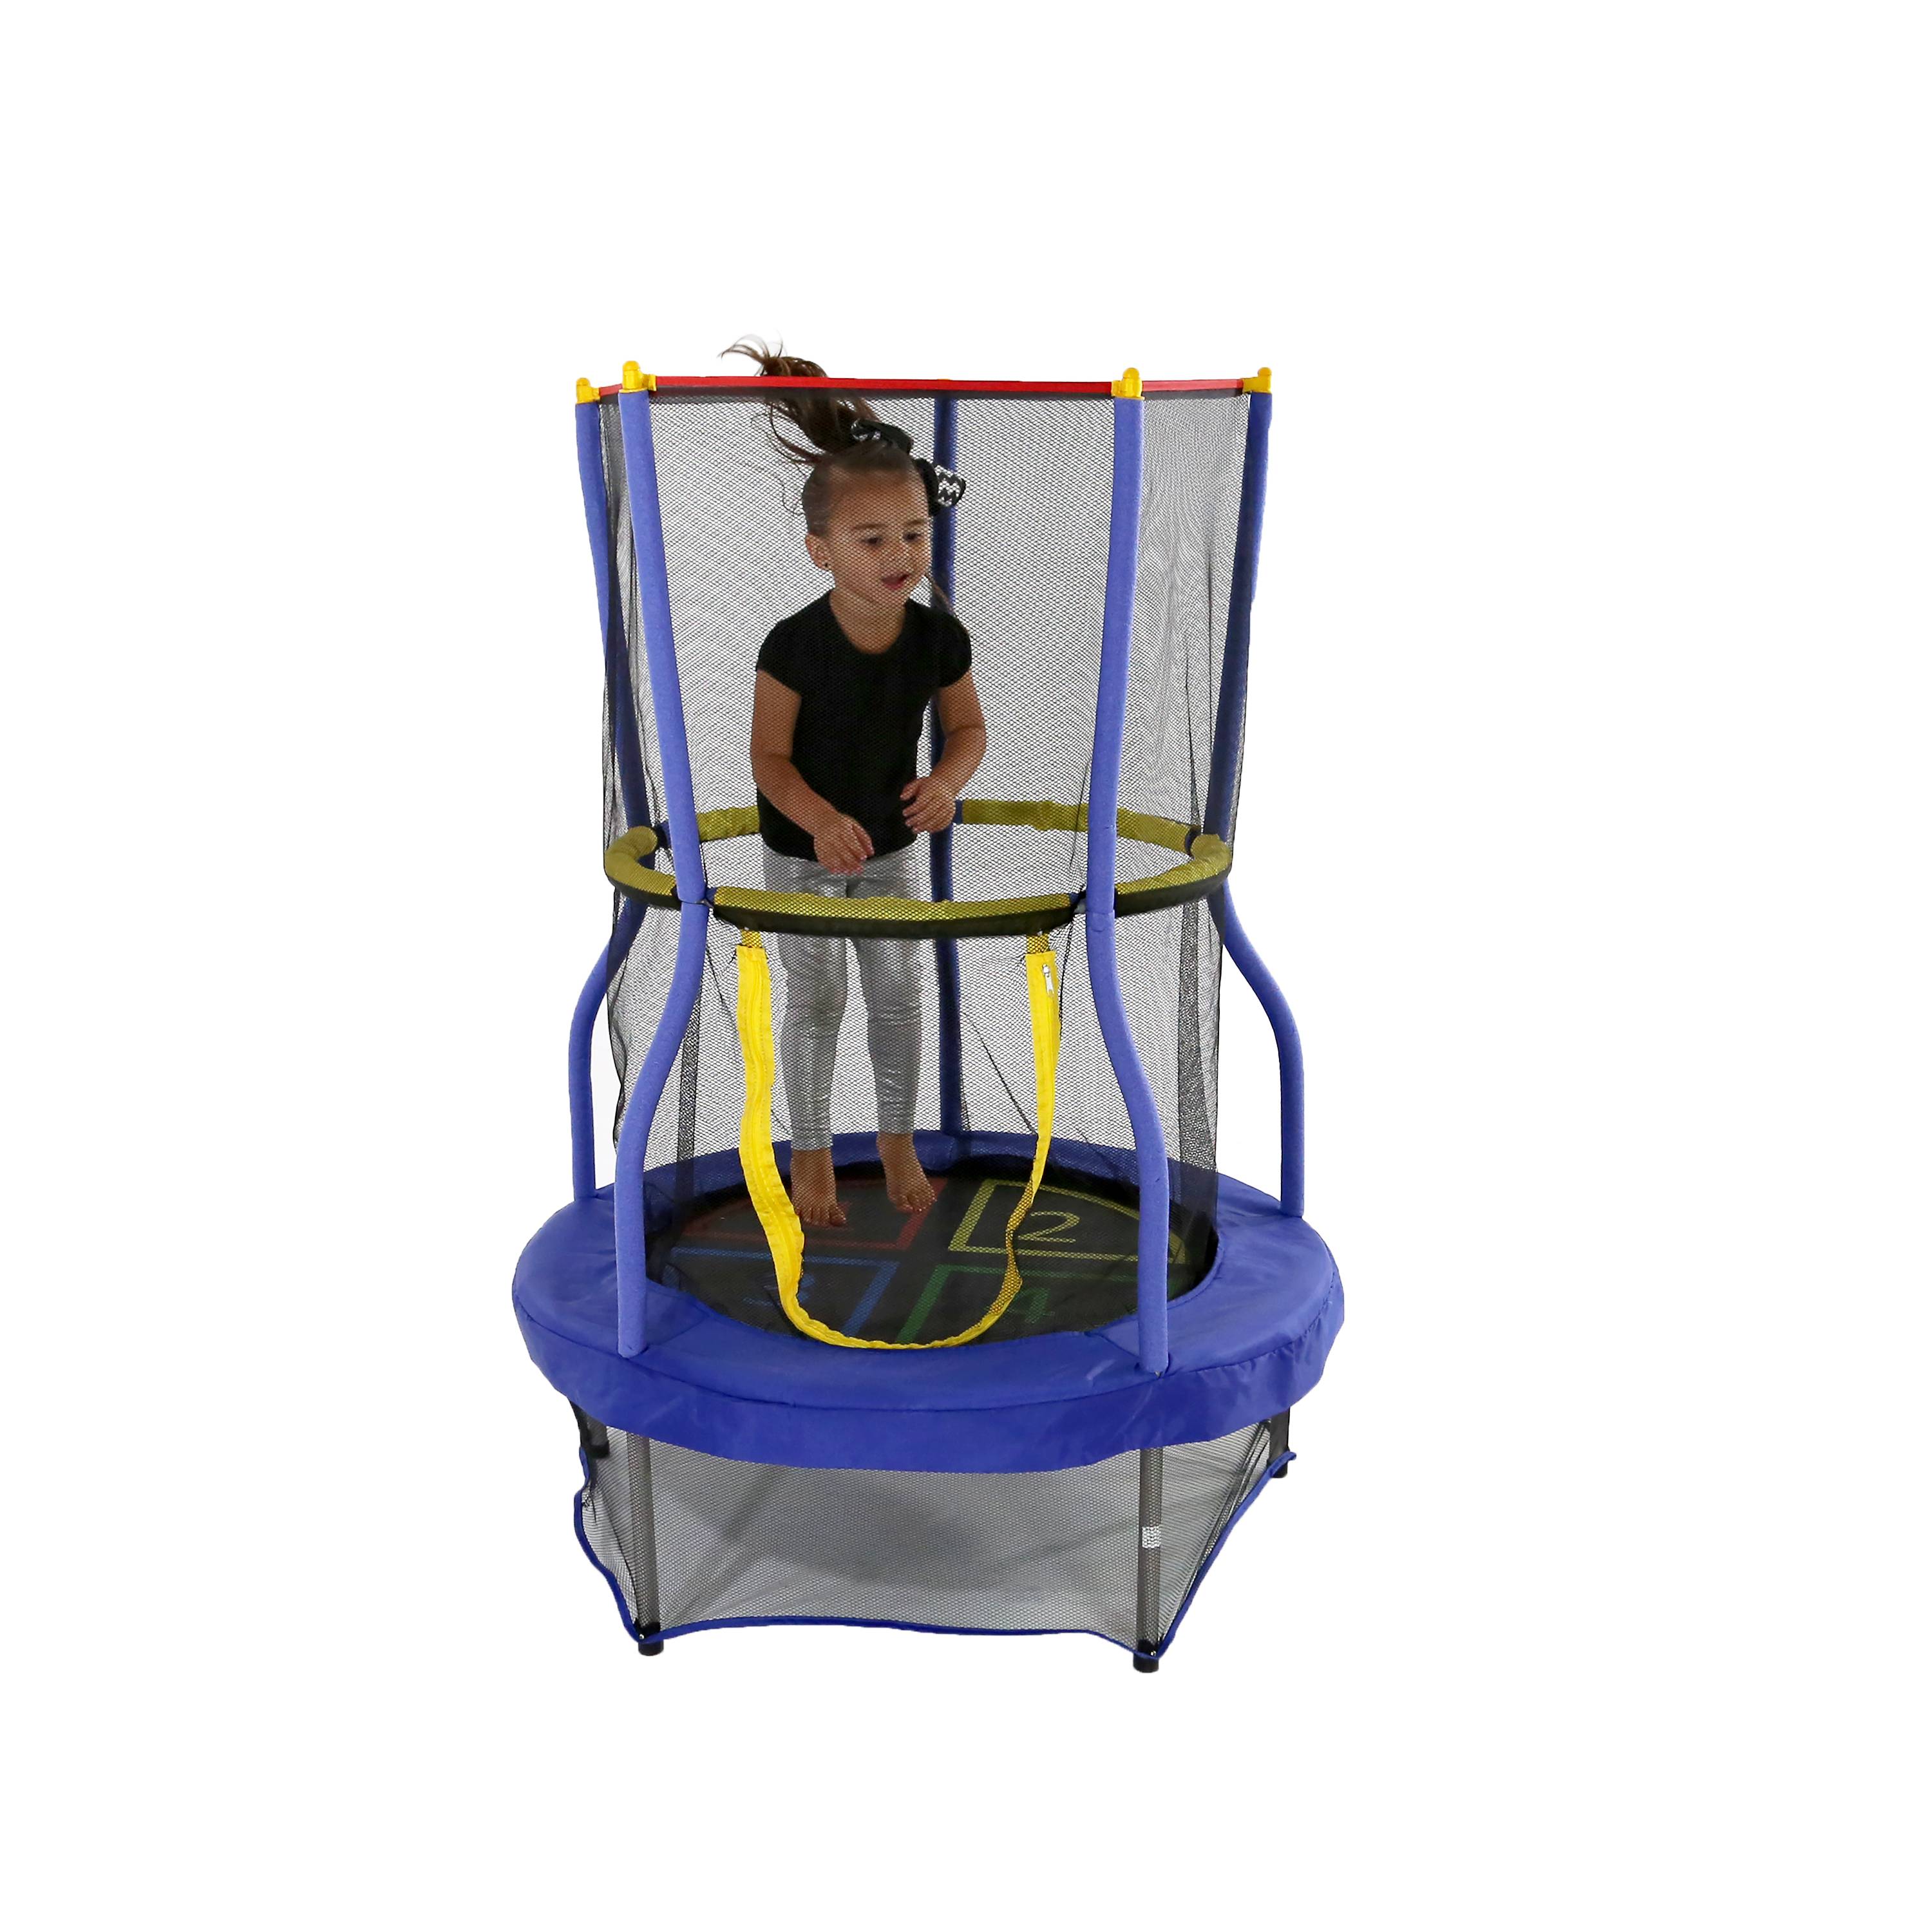 Skywalker Trampolines 40-Inch Bounce-N-Learn Trampoline, with Enclosure, Blue - image 7 of 10